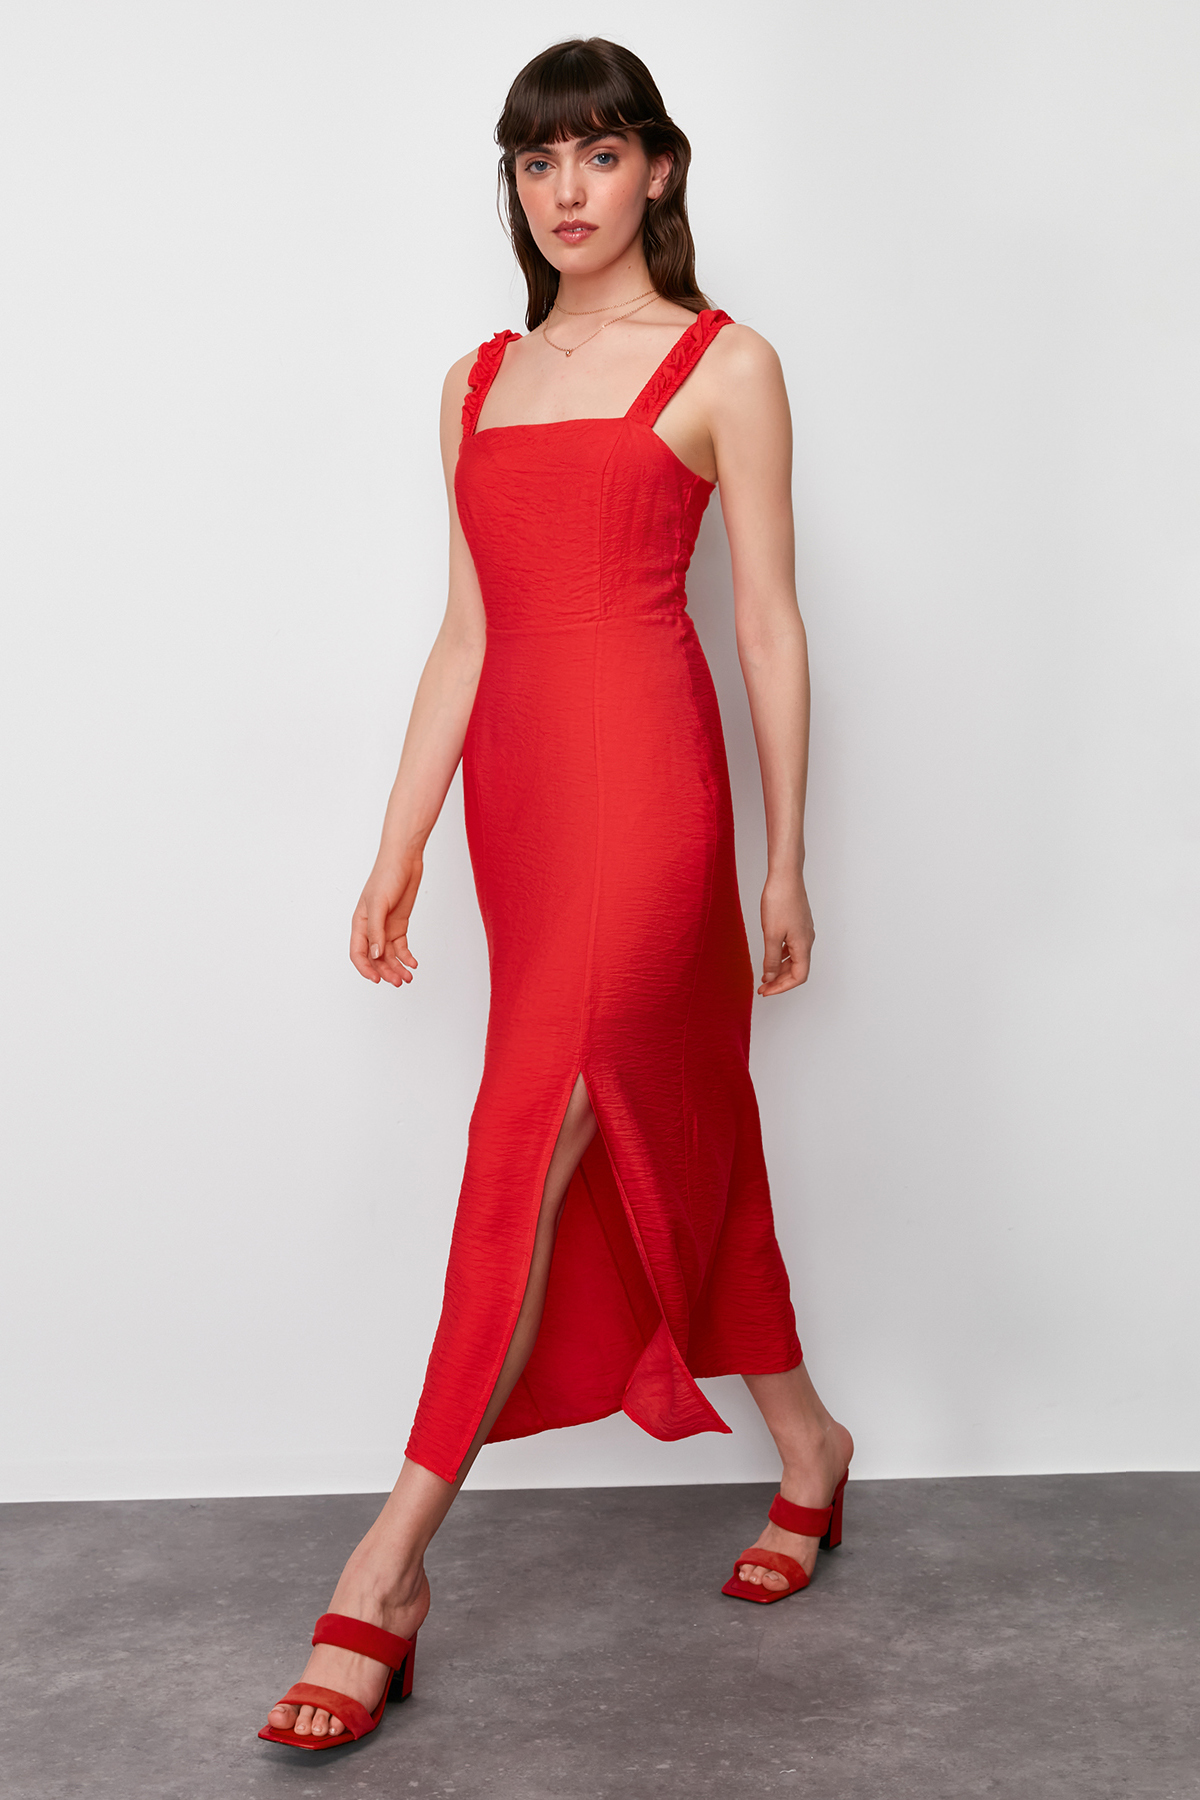 Trendyol Red Straight Cut Back Tie Detailed Woven Midi Dress